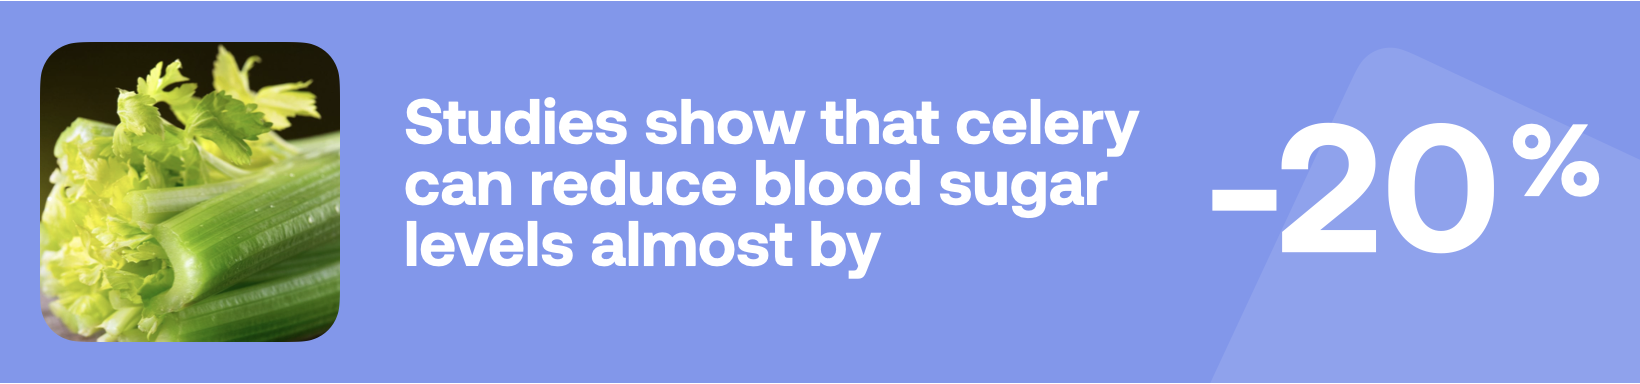 Studies show that celery can reduce blood sugar levels almost by -20%